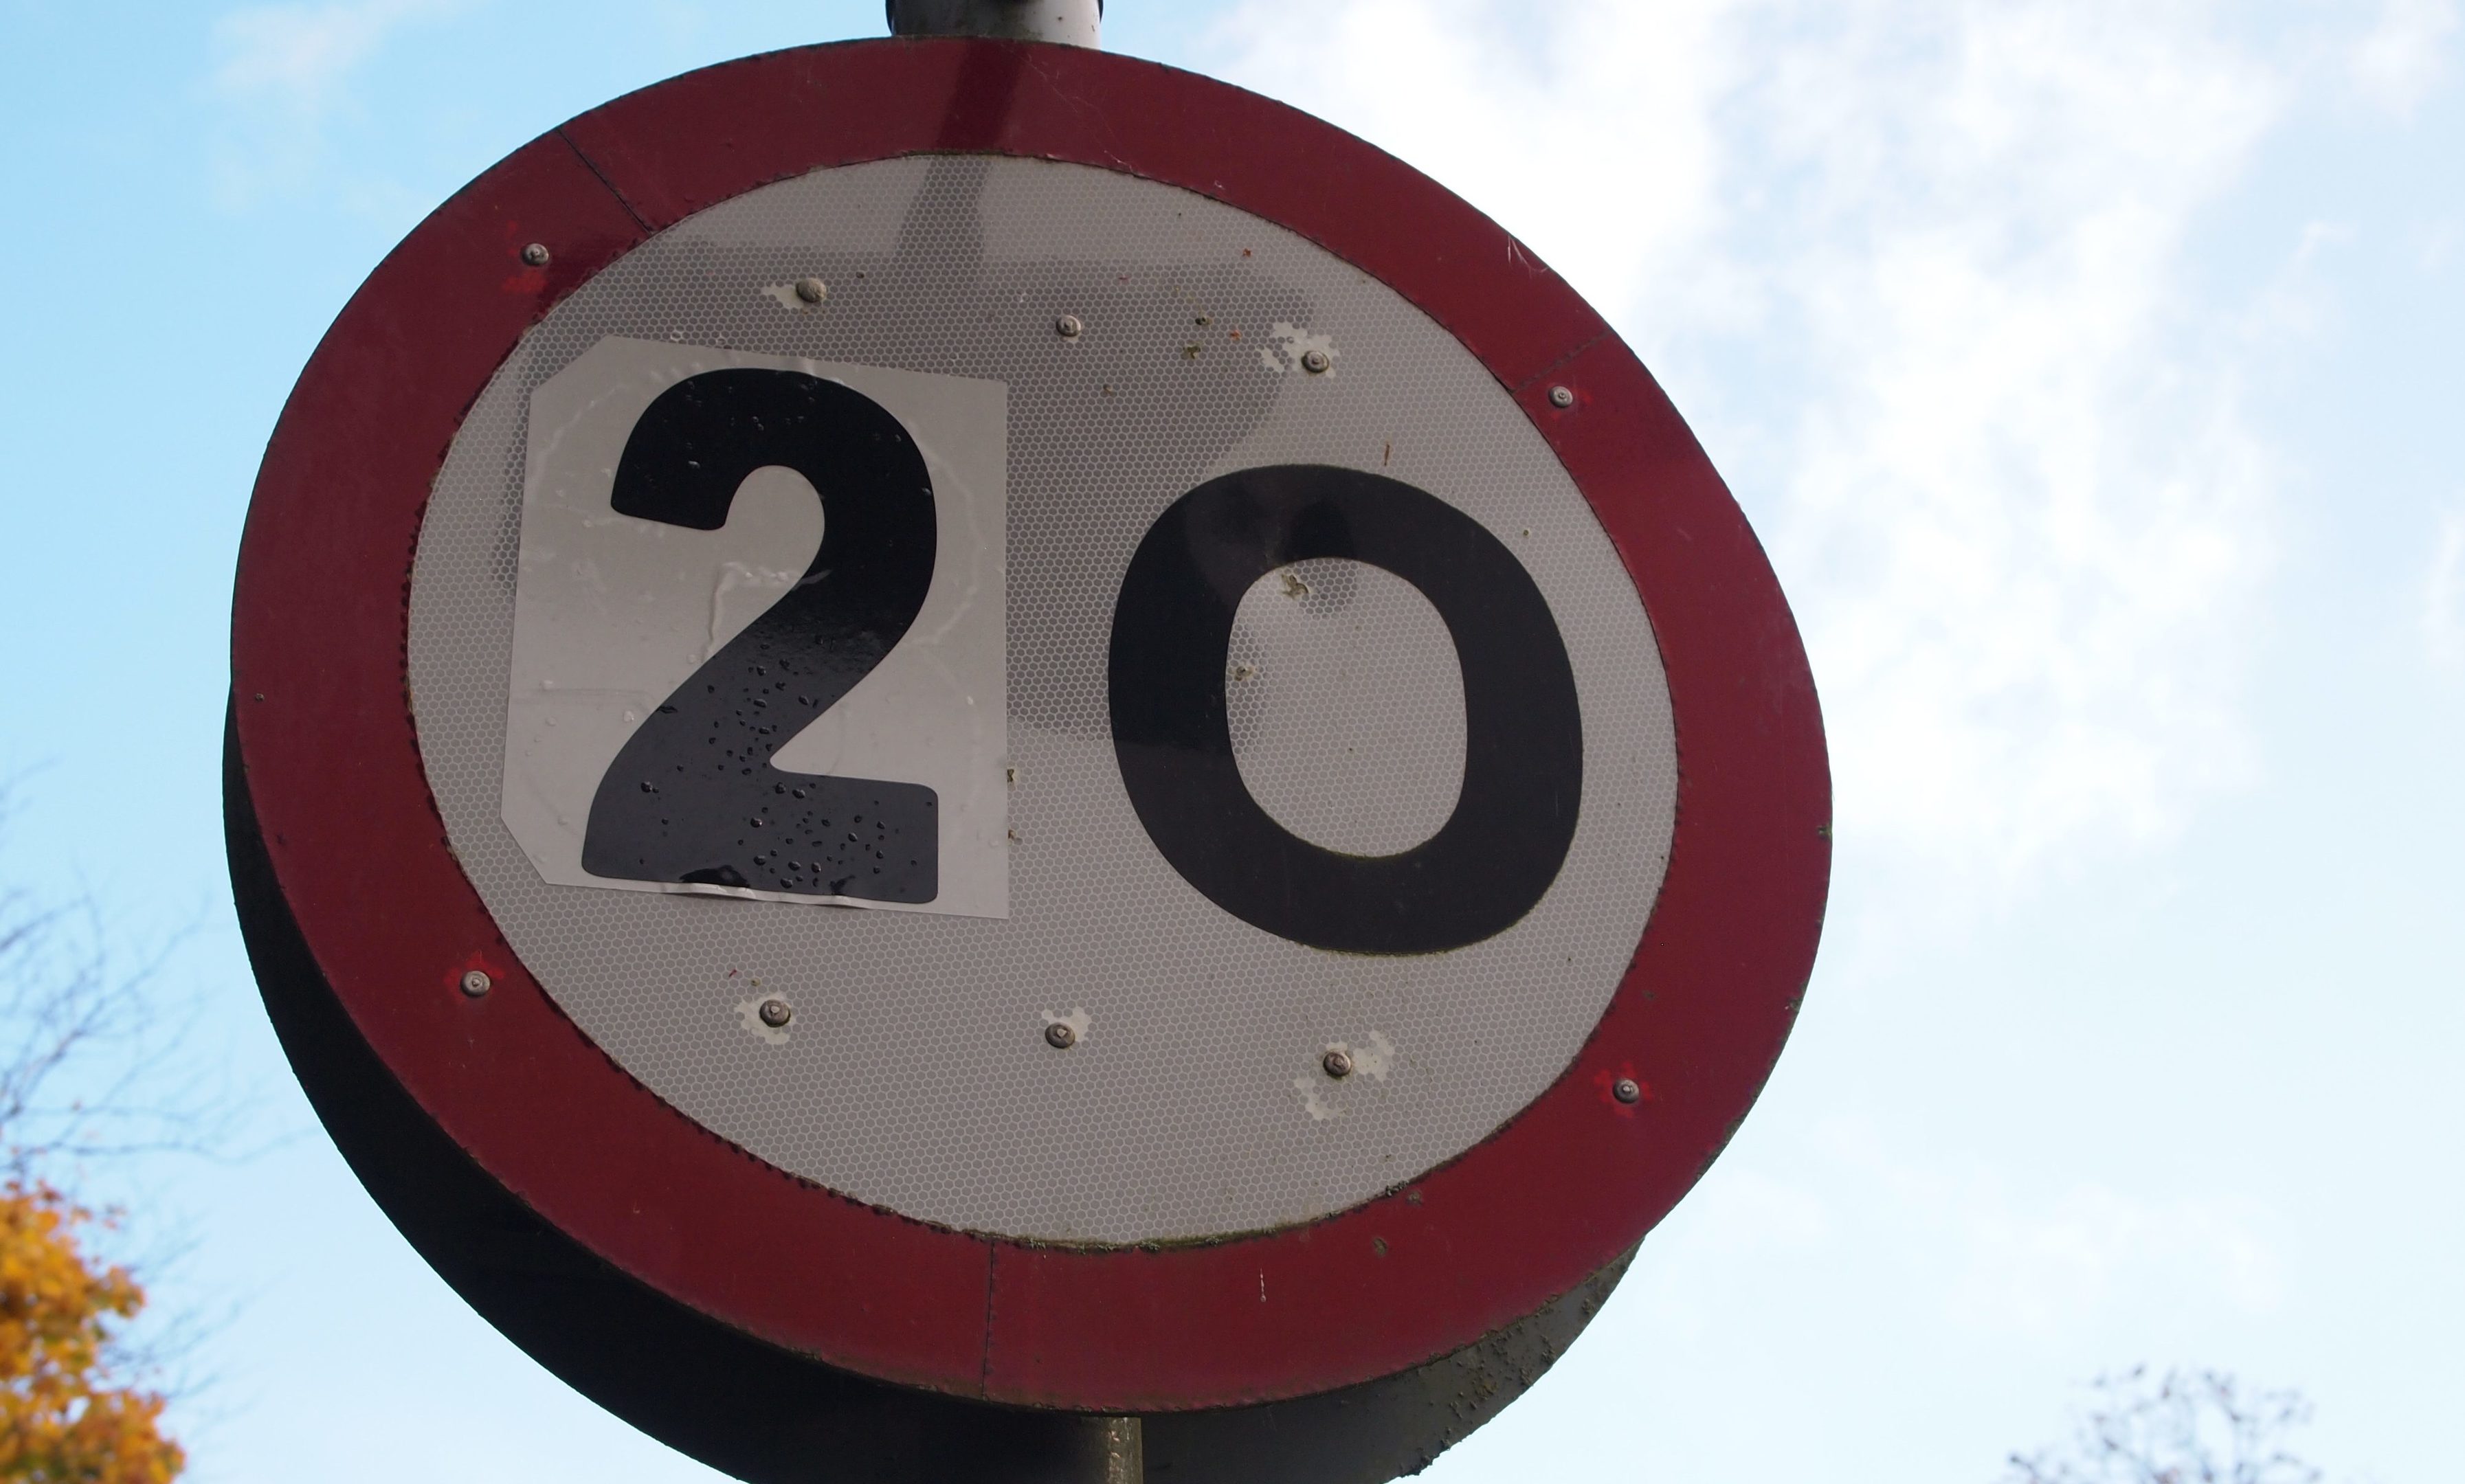 Police Scotland had to become involved after a 20mph protest at Coupar Angus saw signs changed by campaigners.